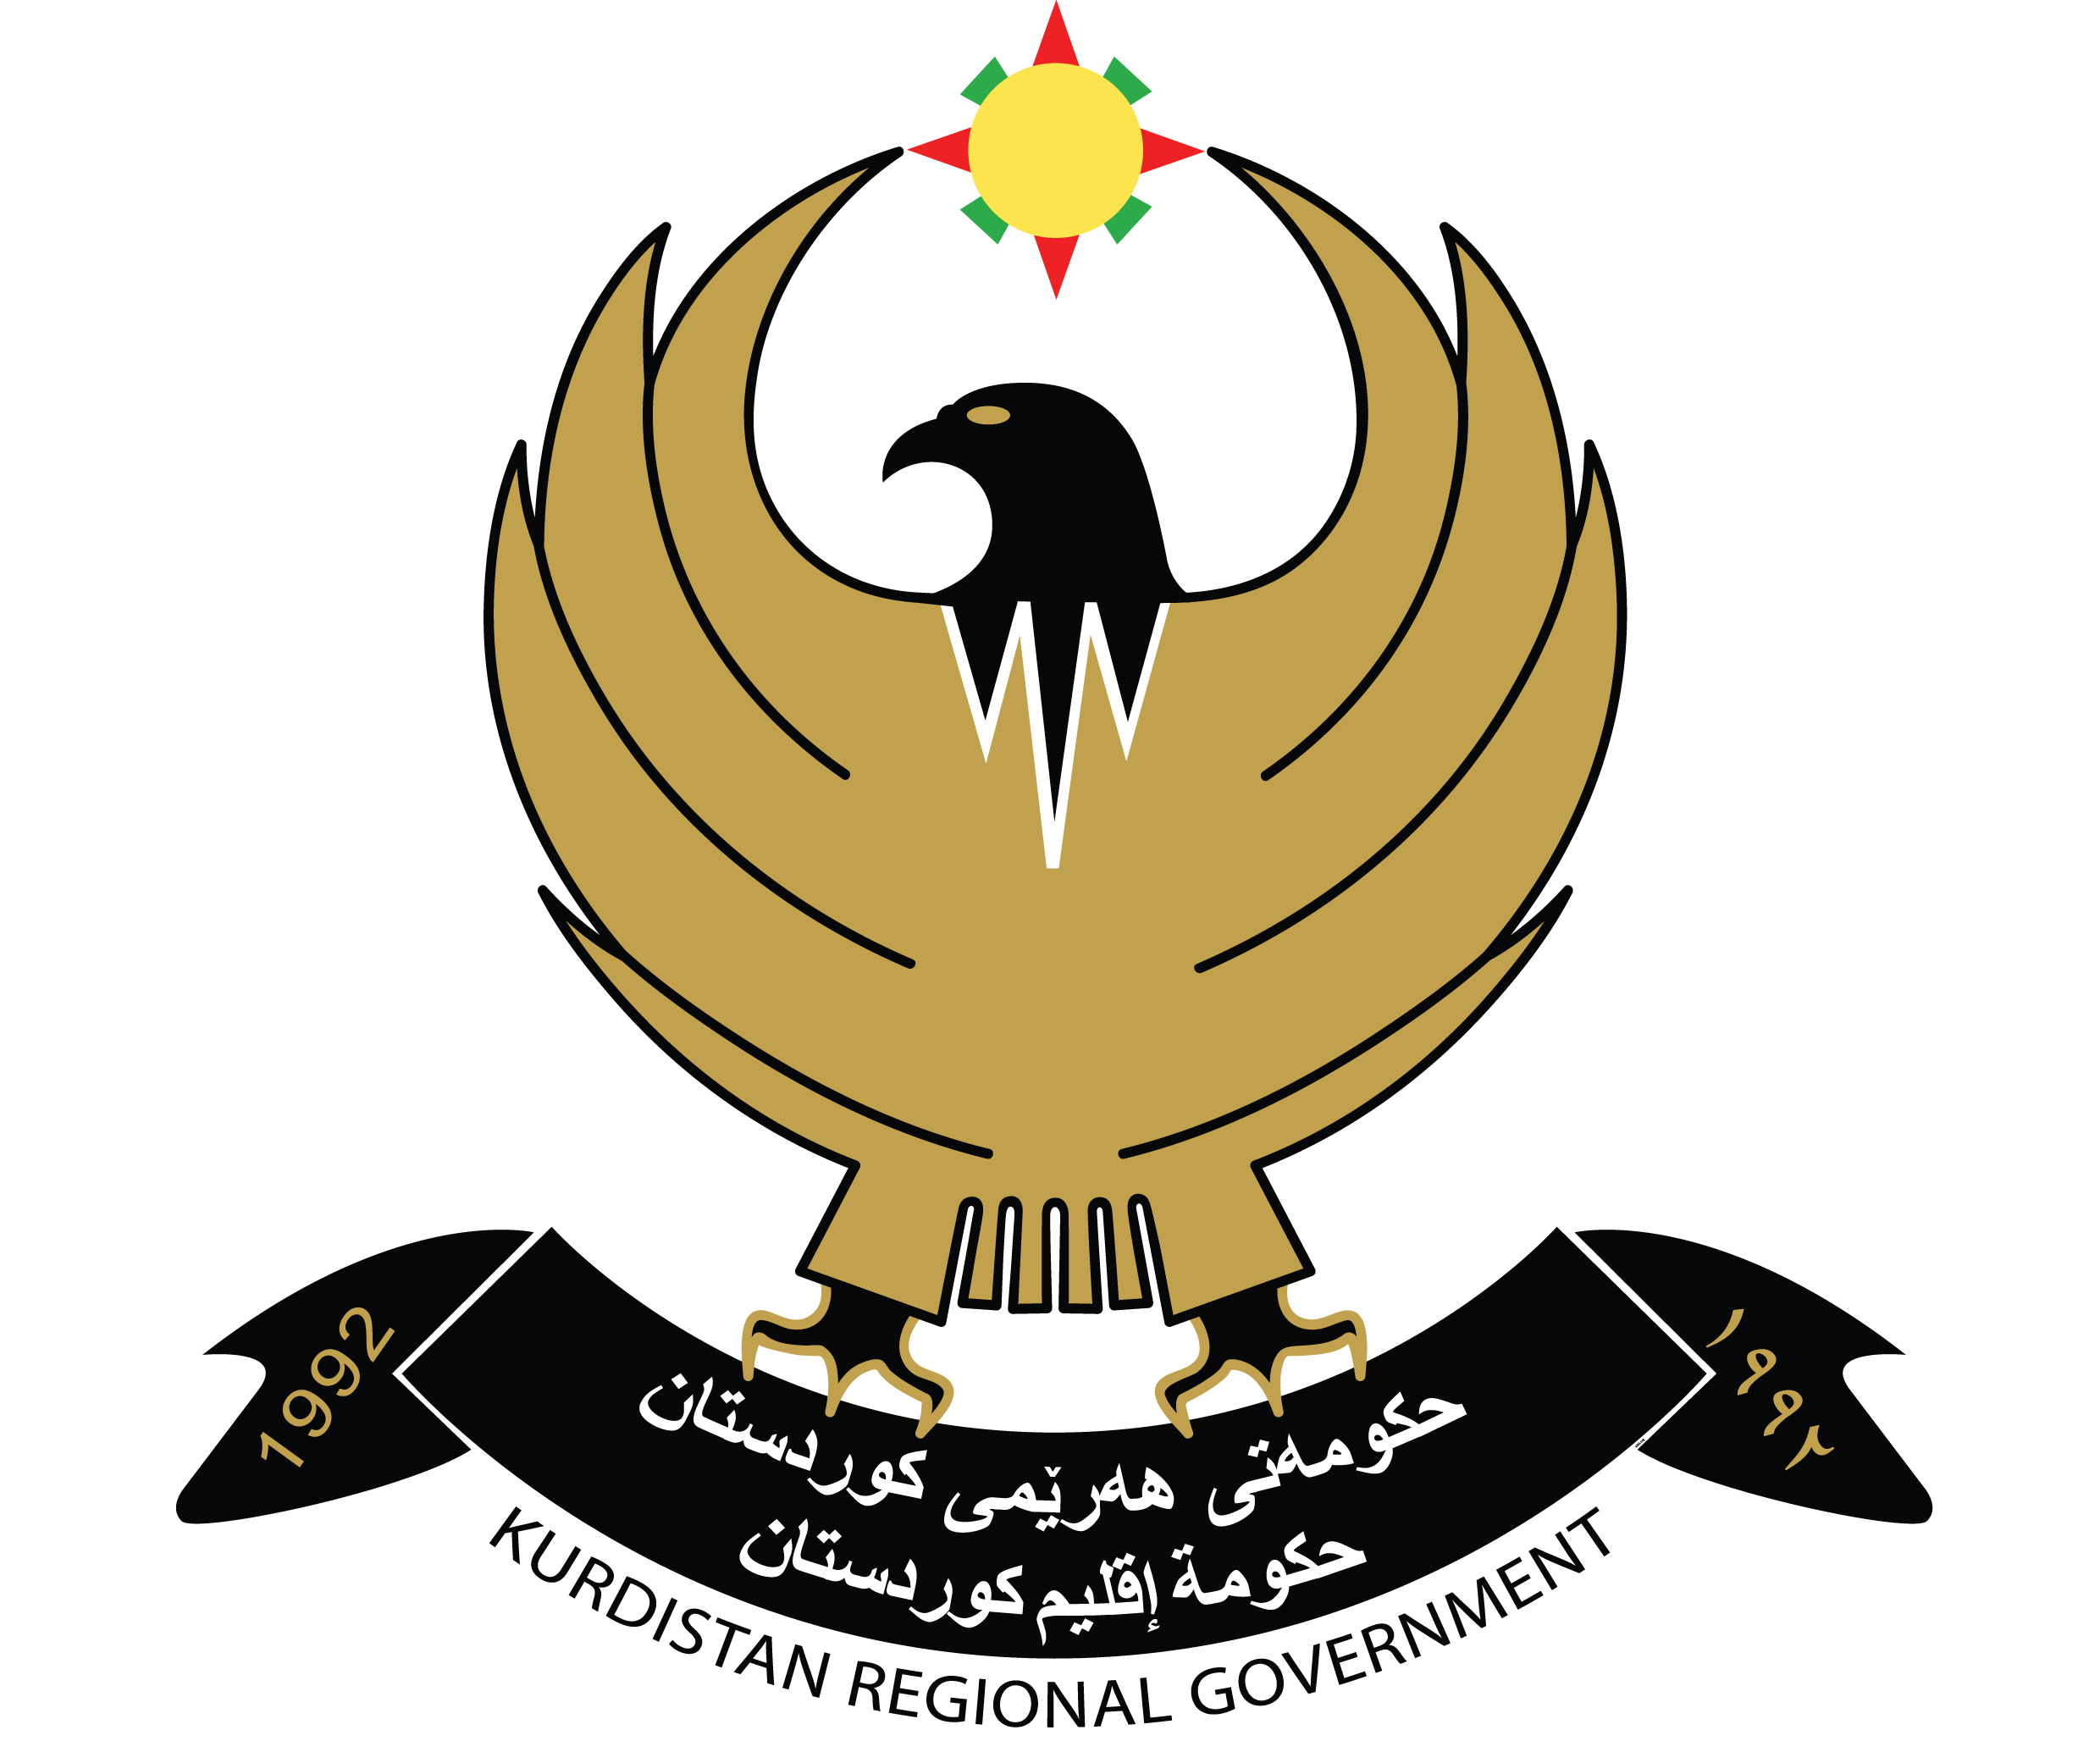 Official Twitter account of the Kurdistan Regional Government Representation in Poland, facebook: Kurdistan Regional Government Representation in Poland